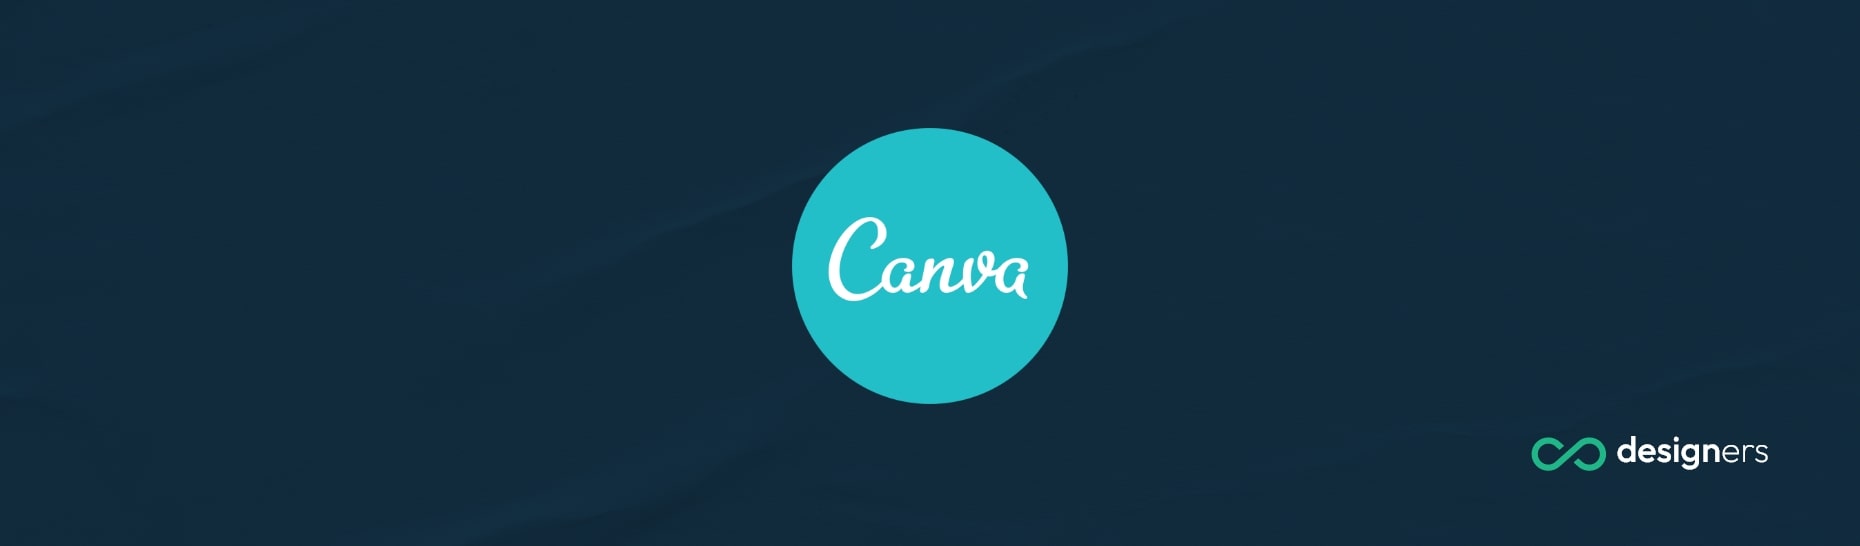 How Is Canva Worth So Much?